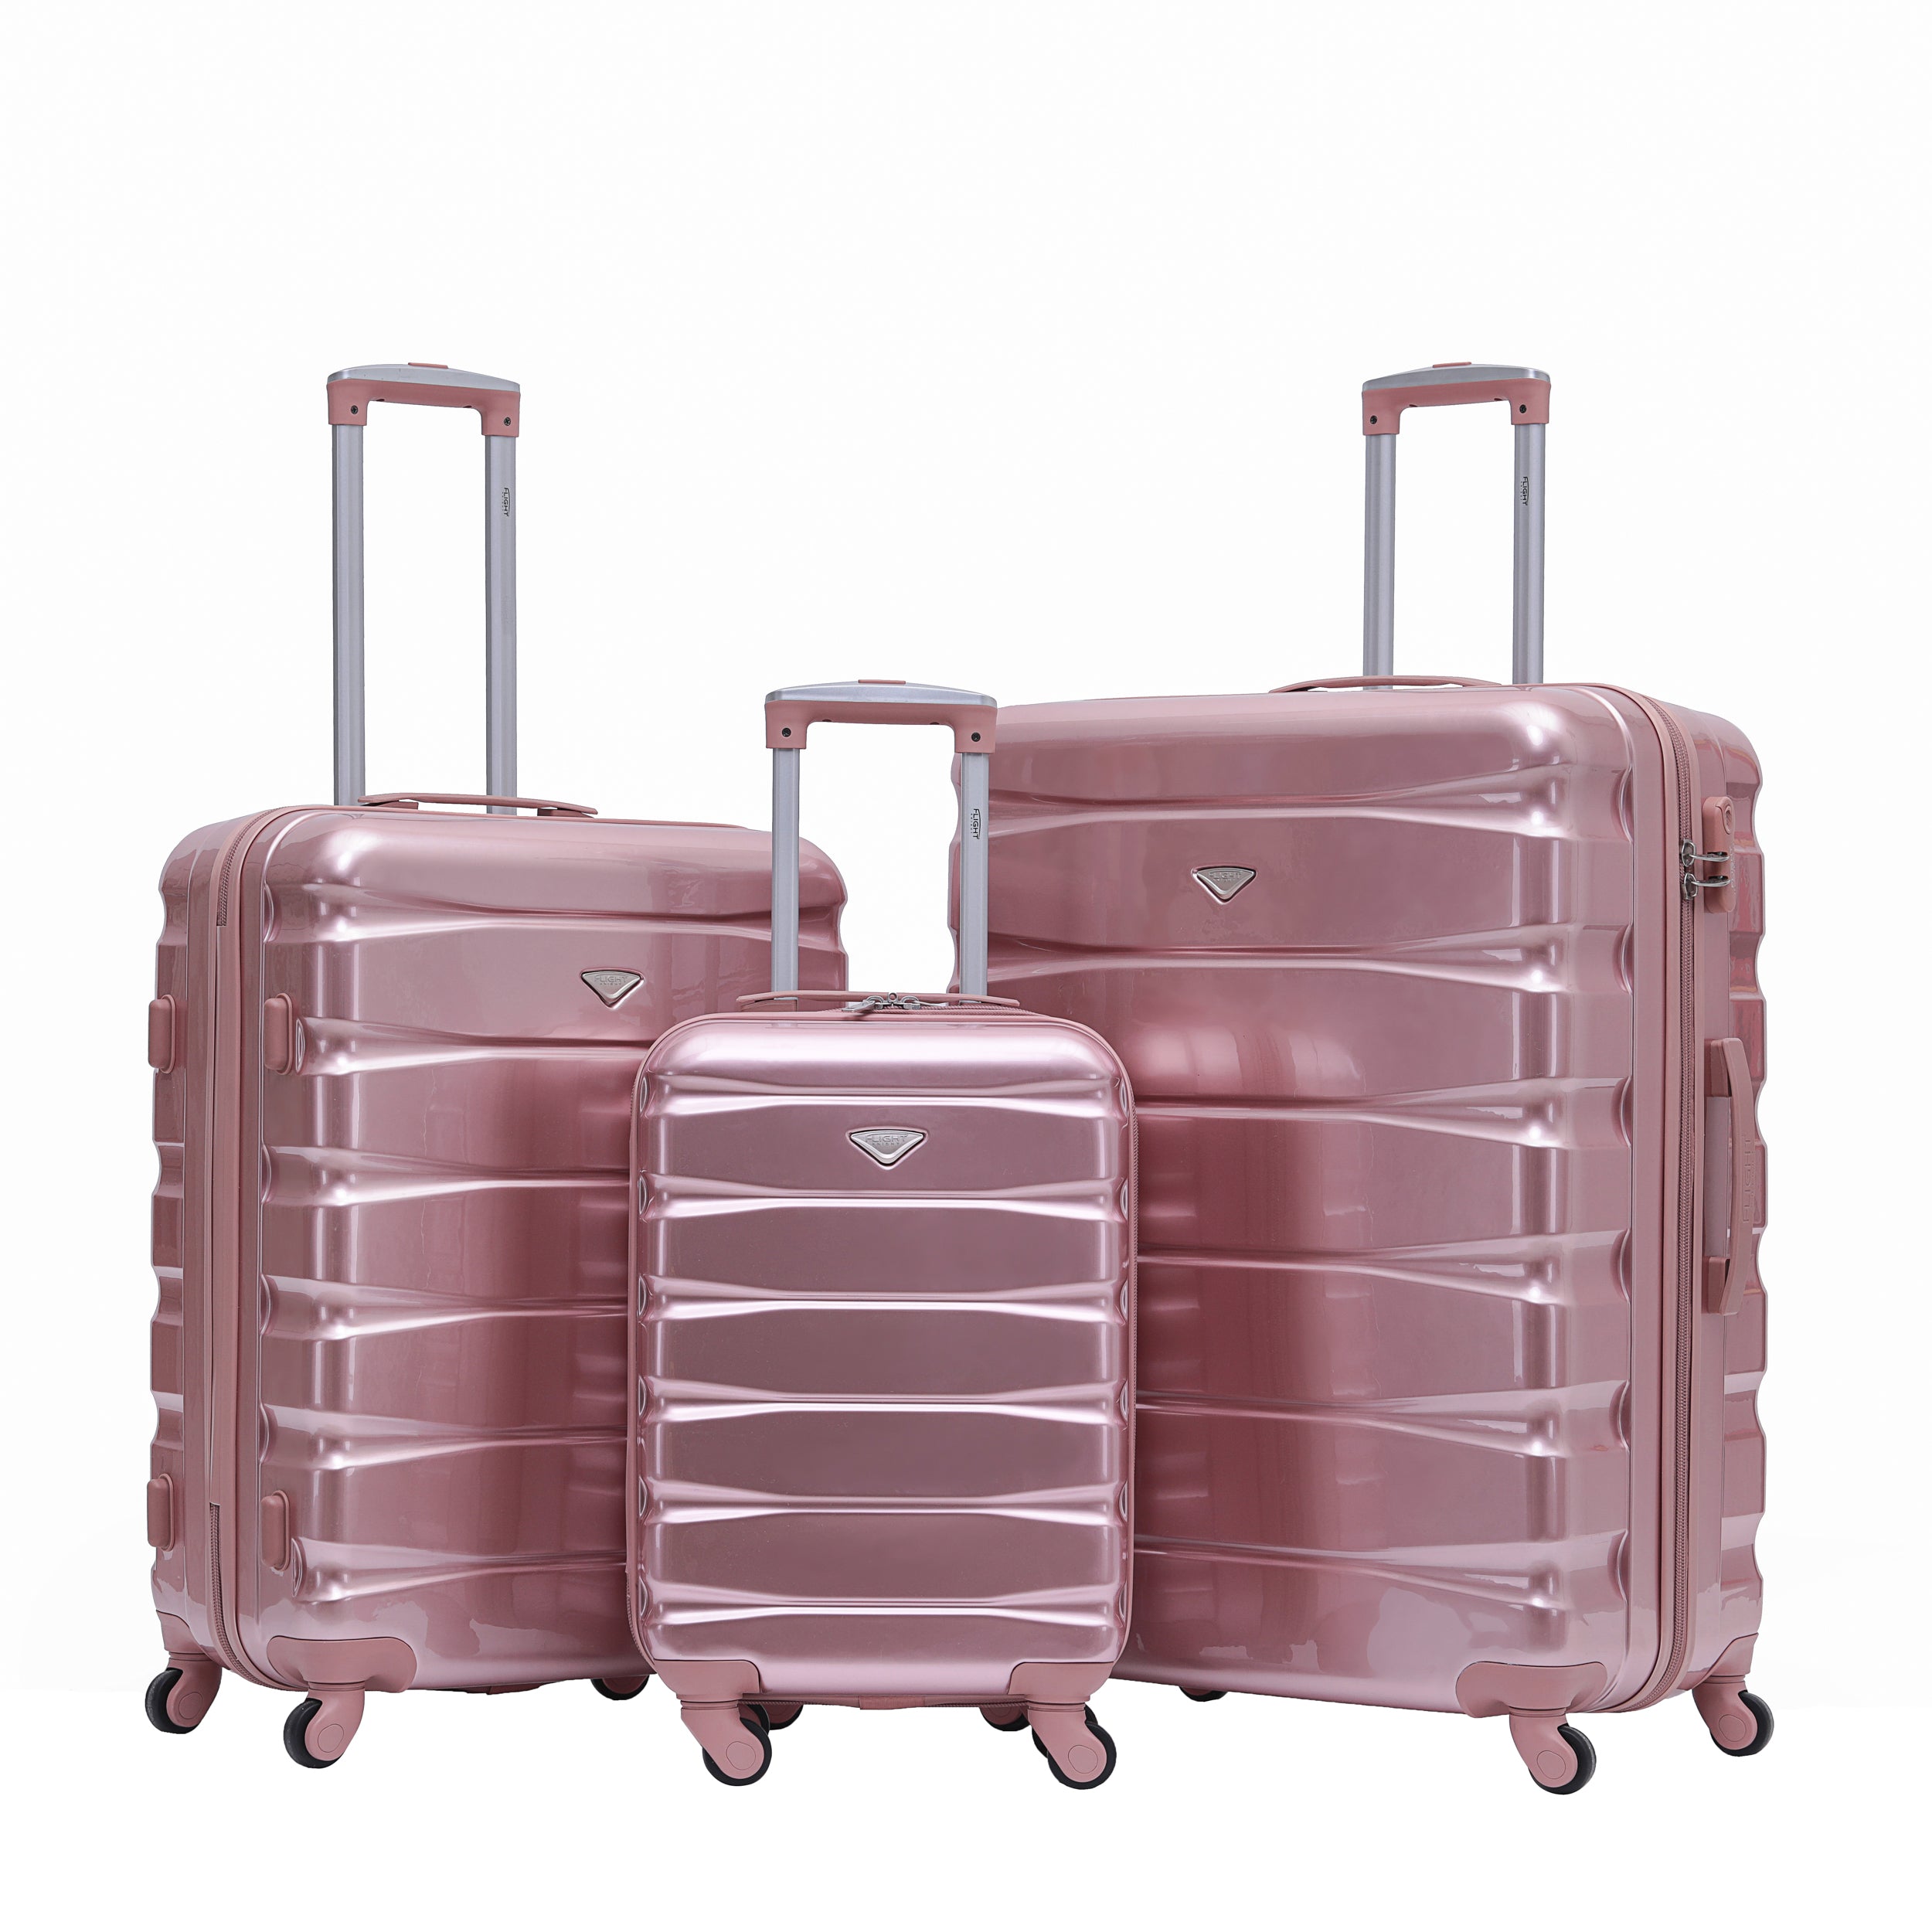 Lightweight 4 Wheel Hard Case Suitcases Cabin & Hold Luggage Emirates Approved